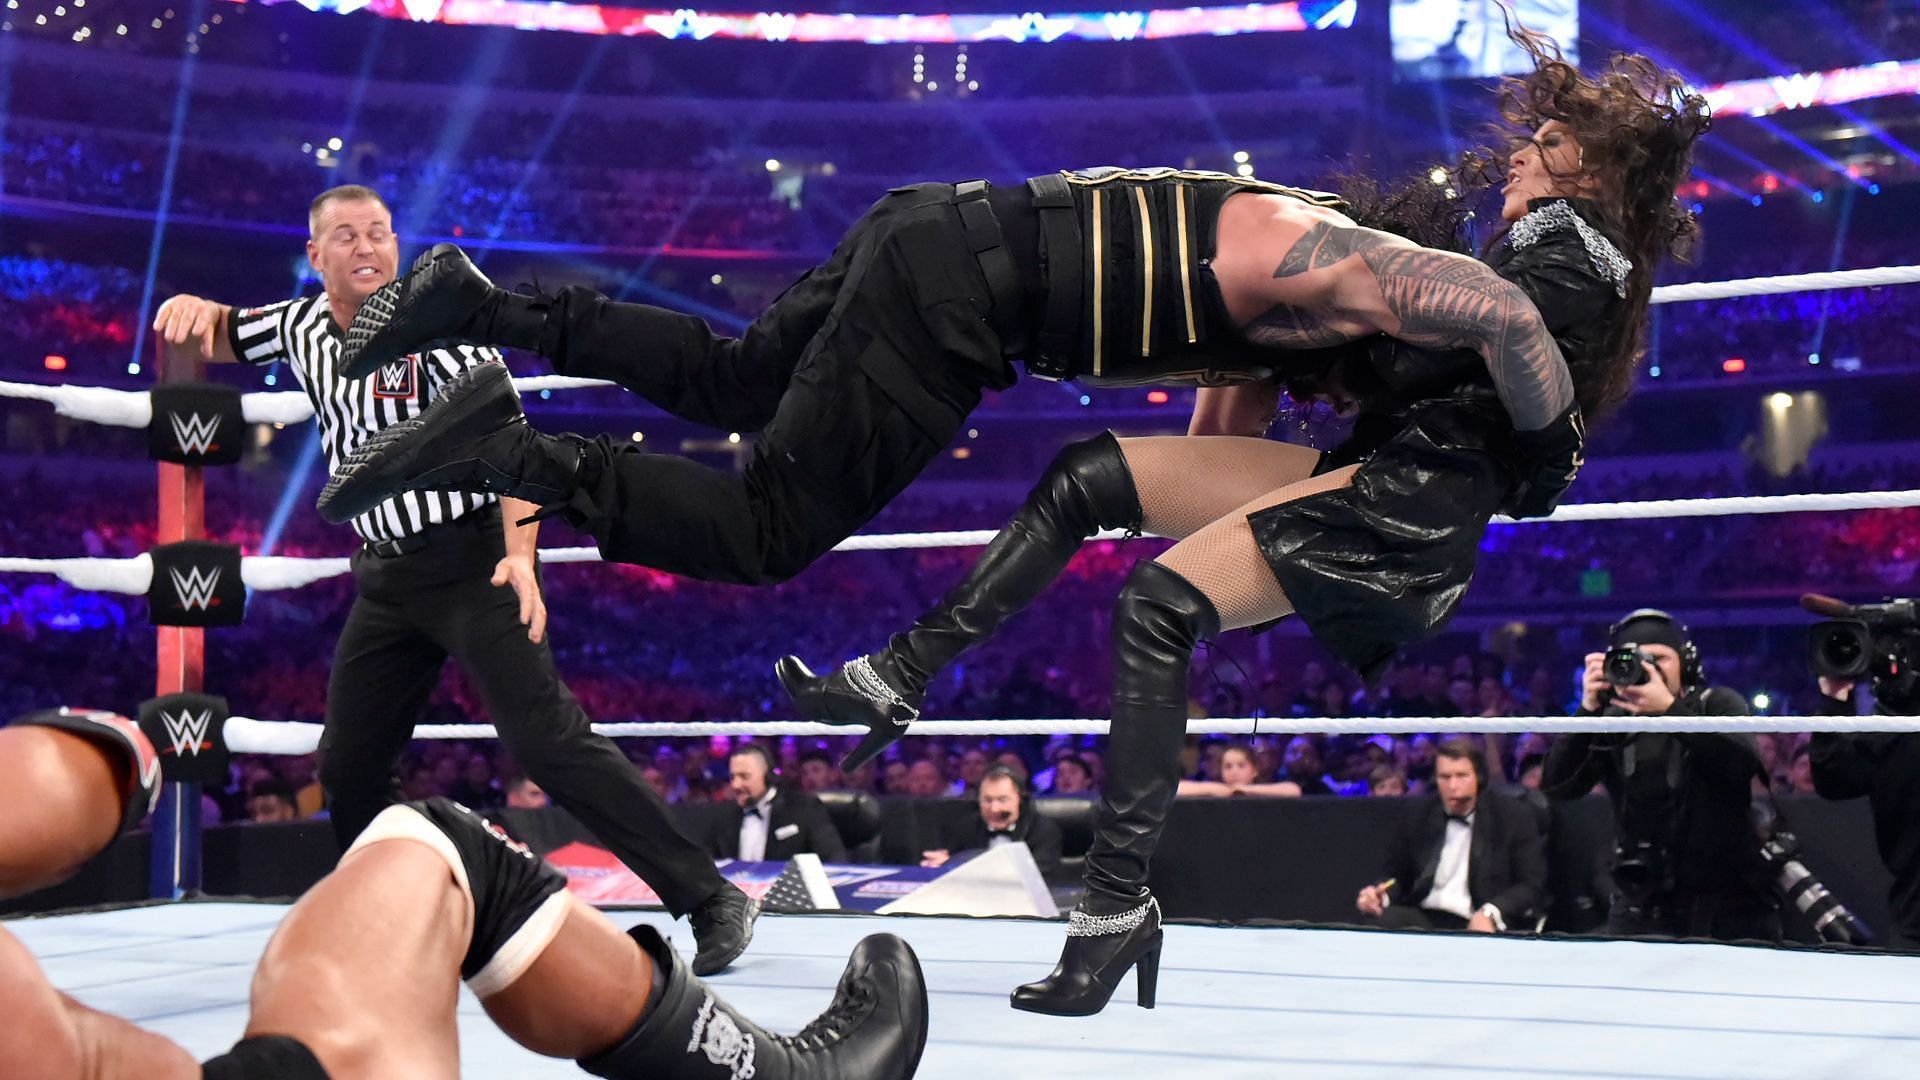 Stephanie McMahon took a nasty bump from Roman Reigns at WWE WrestleMania 32.